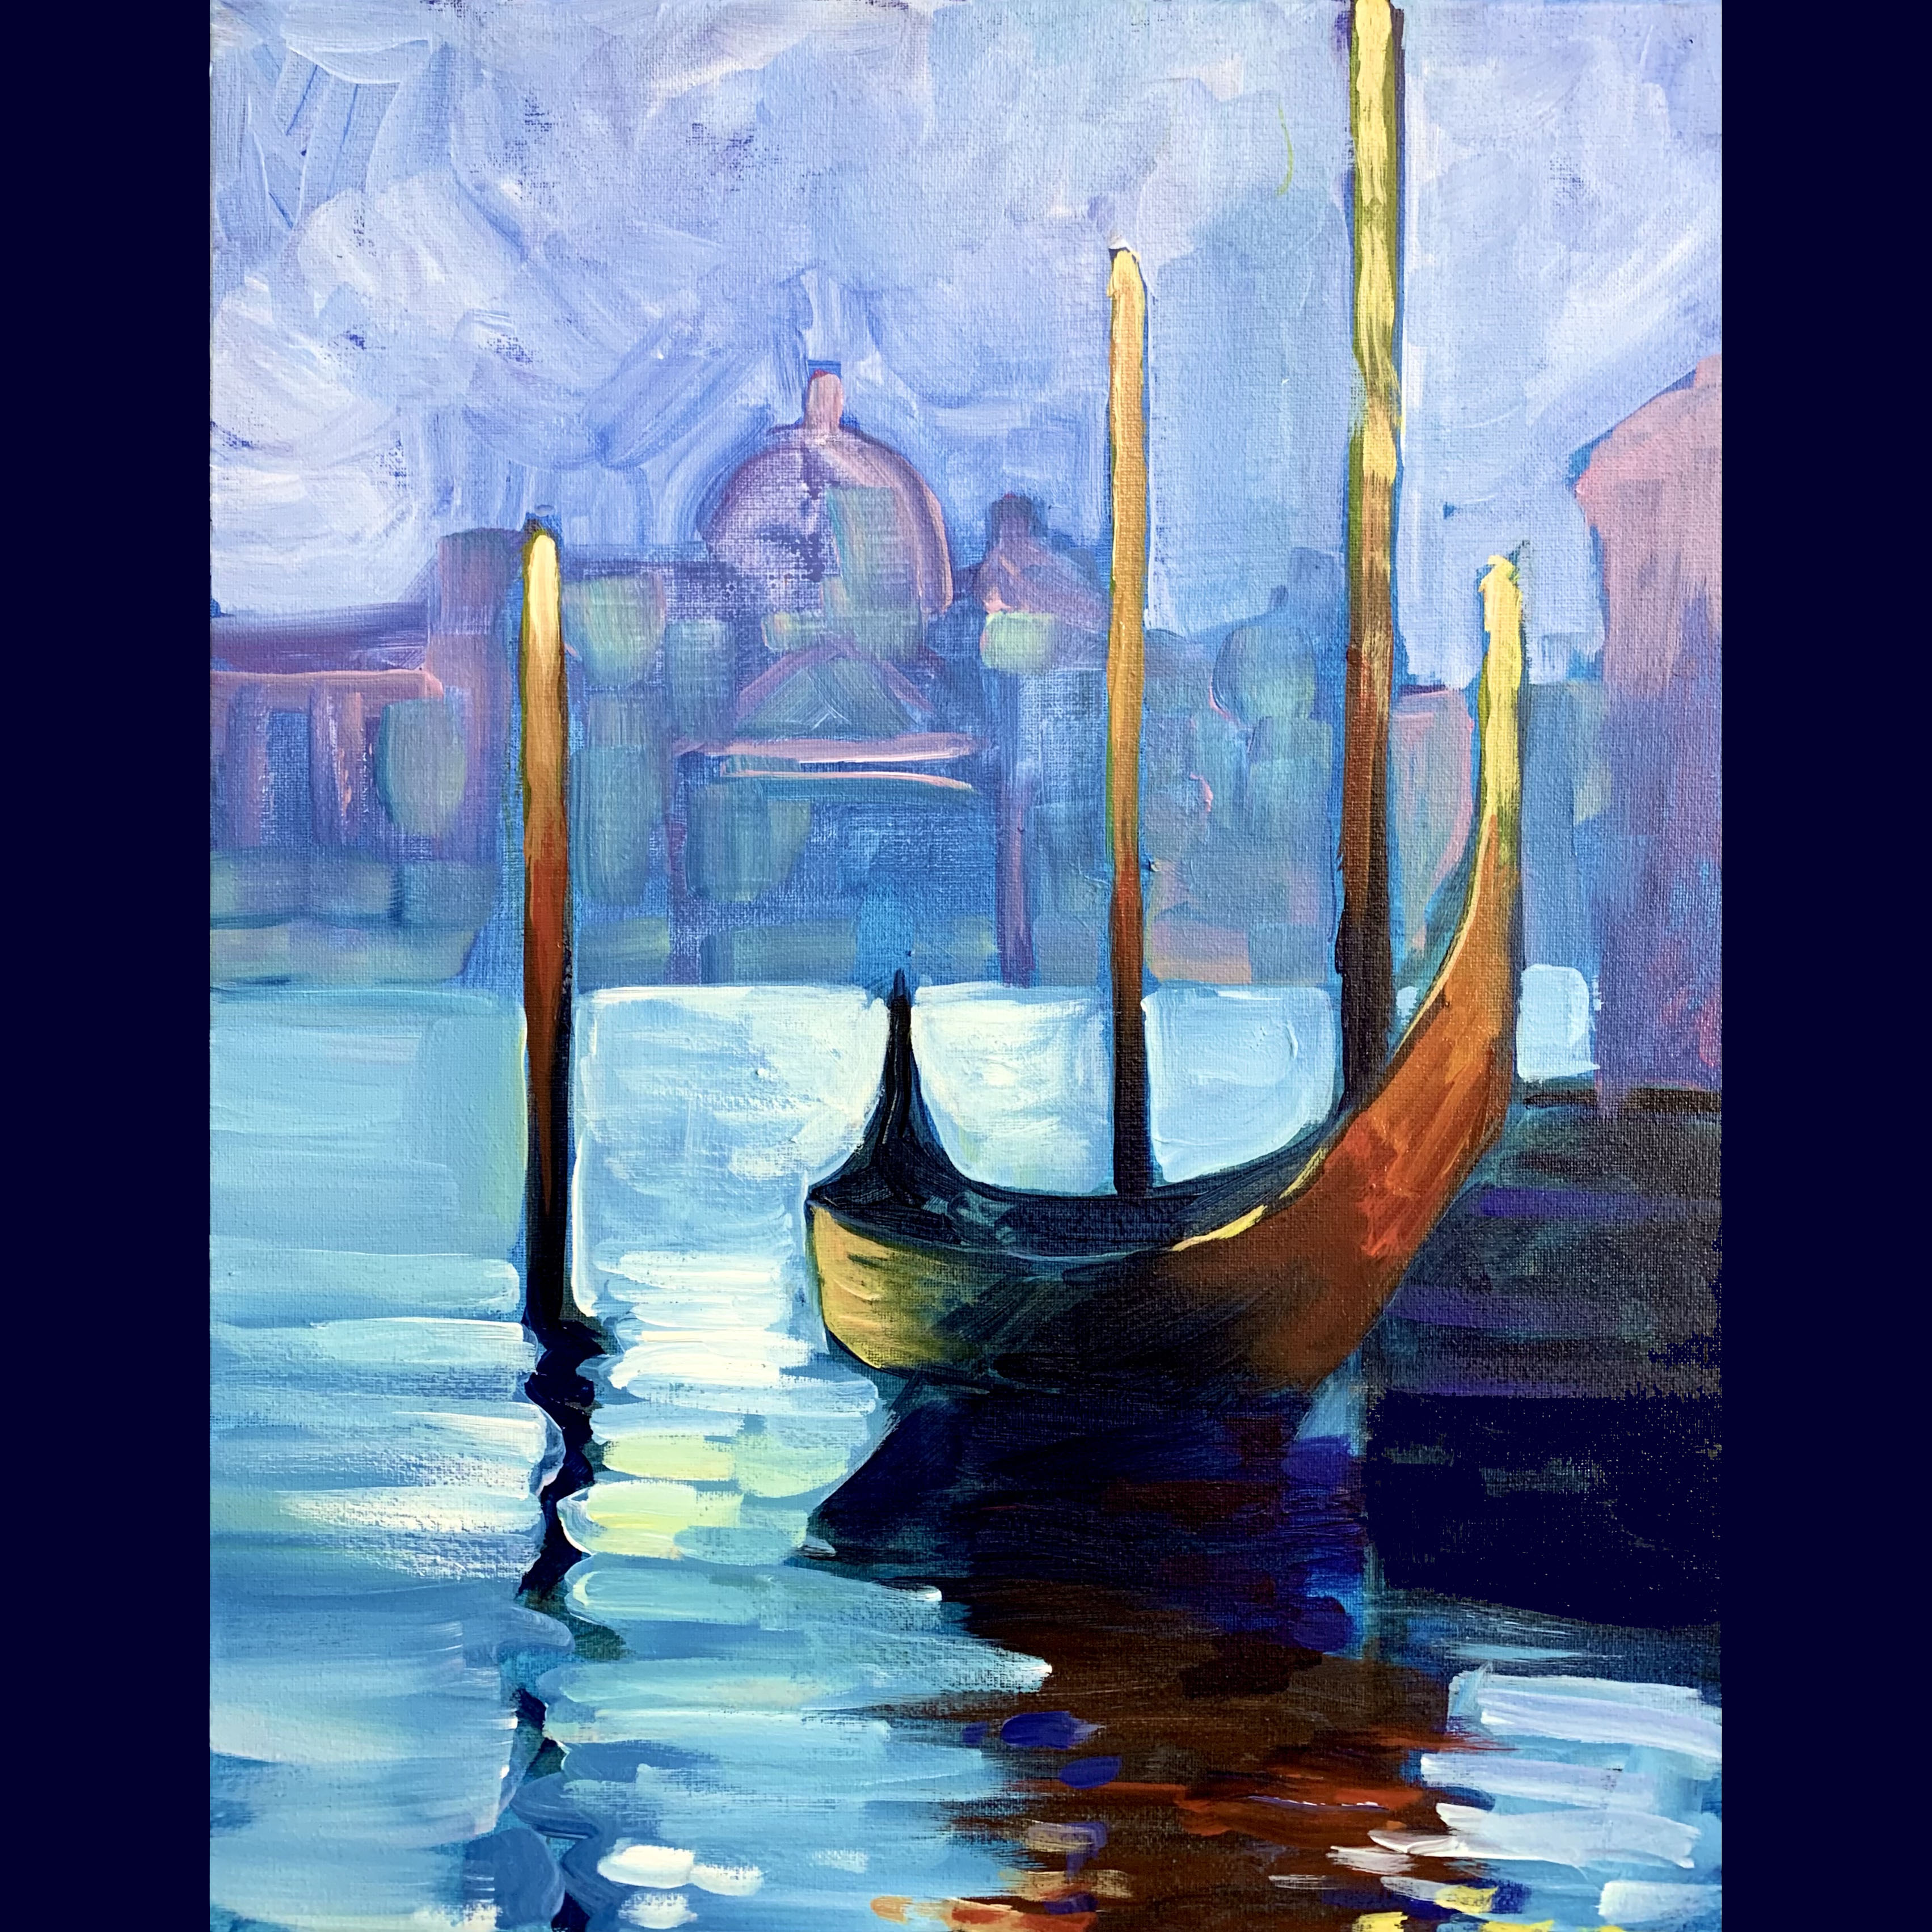 A Claude Monet  Gondola in Venice experience project by Yaymaker